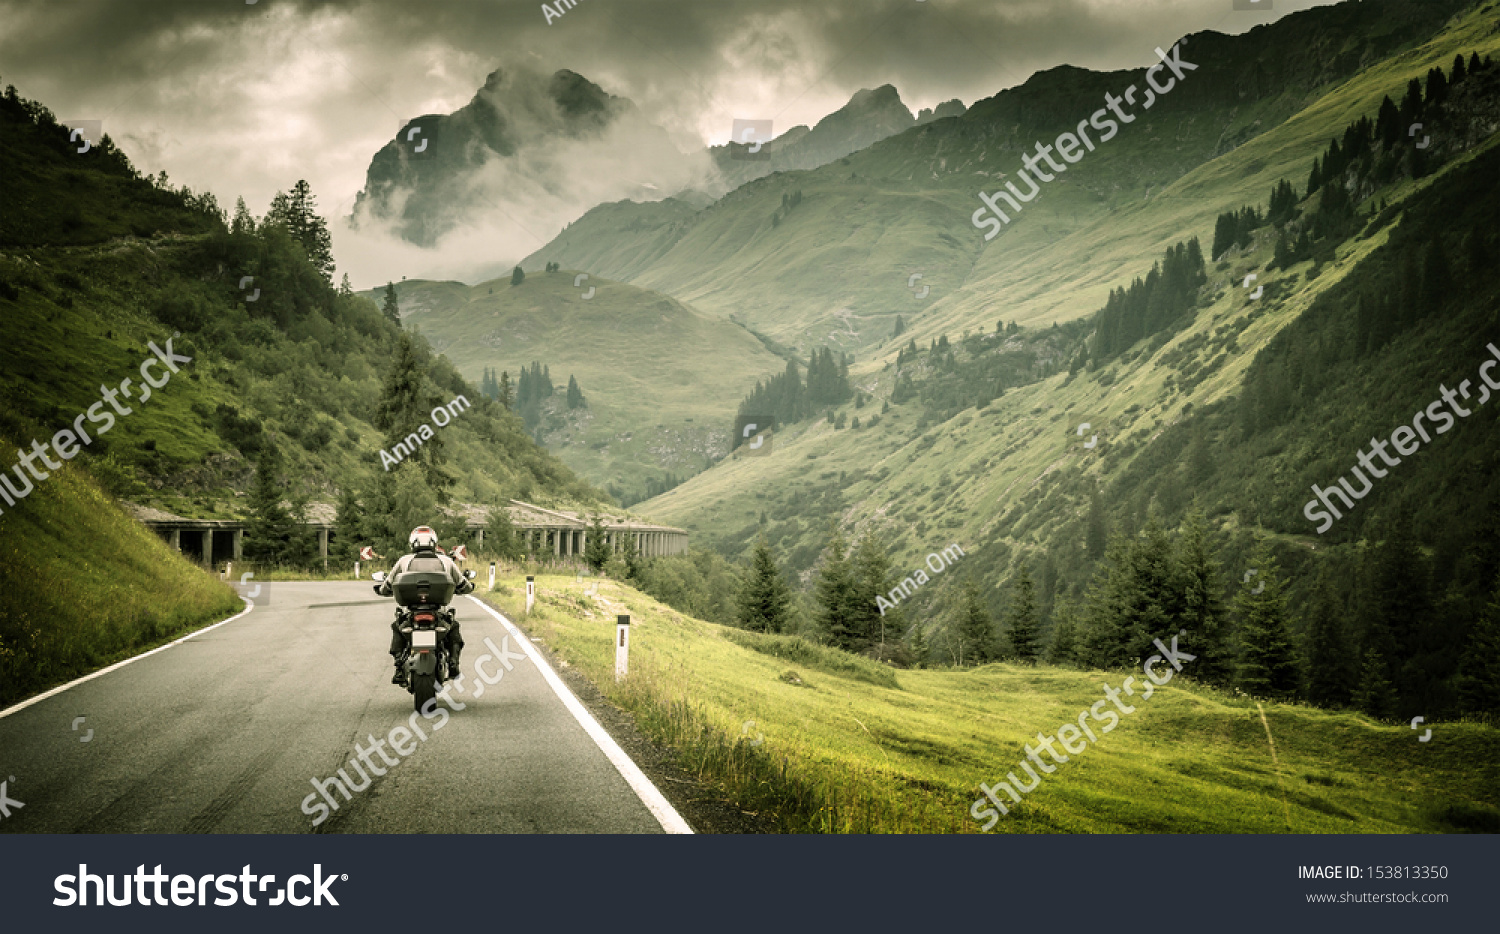 Motorcyclist on mountainous highway, cold overcast weather, Europe, Austria, Alps, extreme sport, active lifestyle, adventure touring concept #153813350